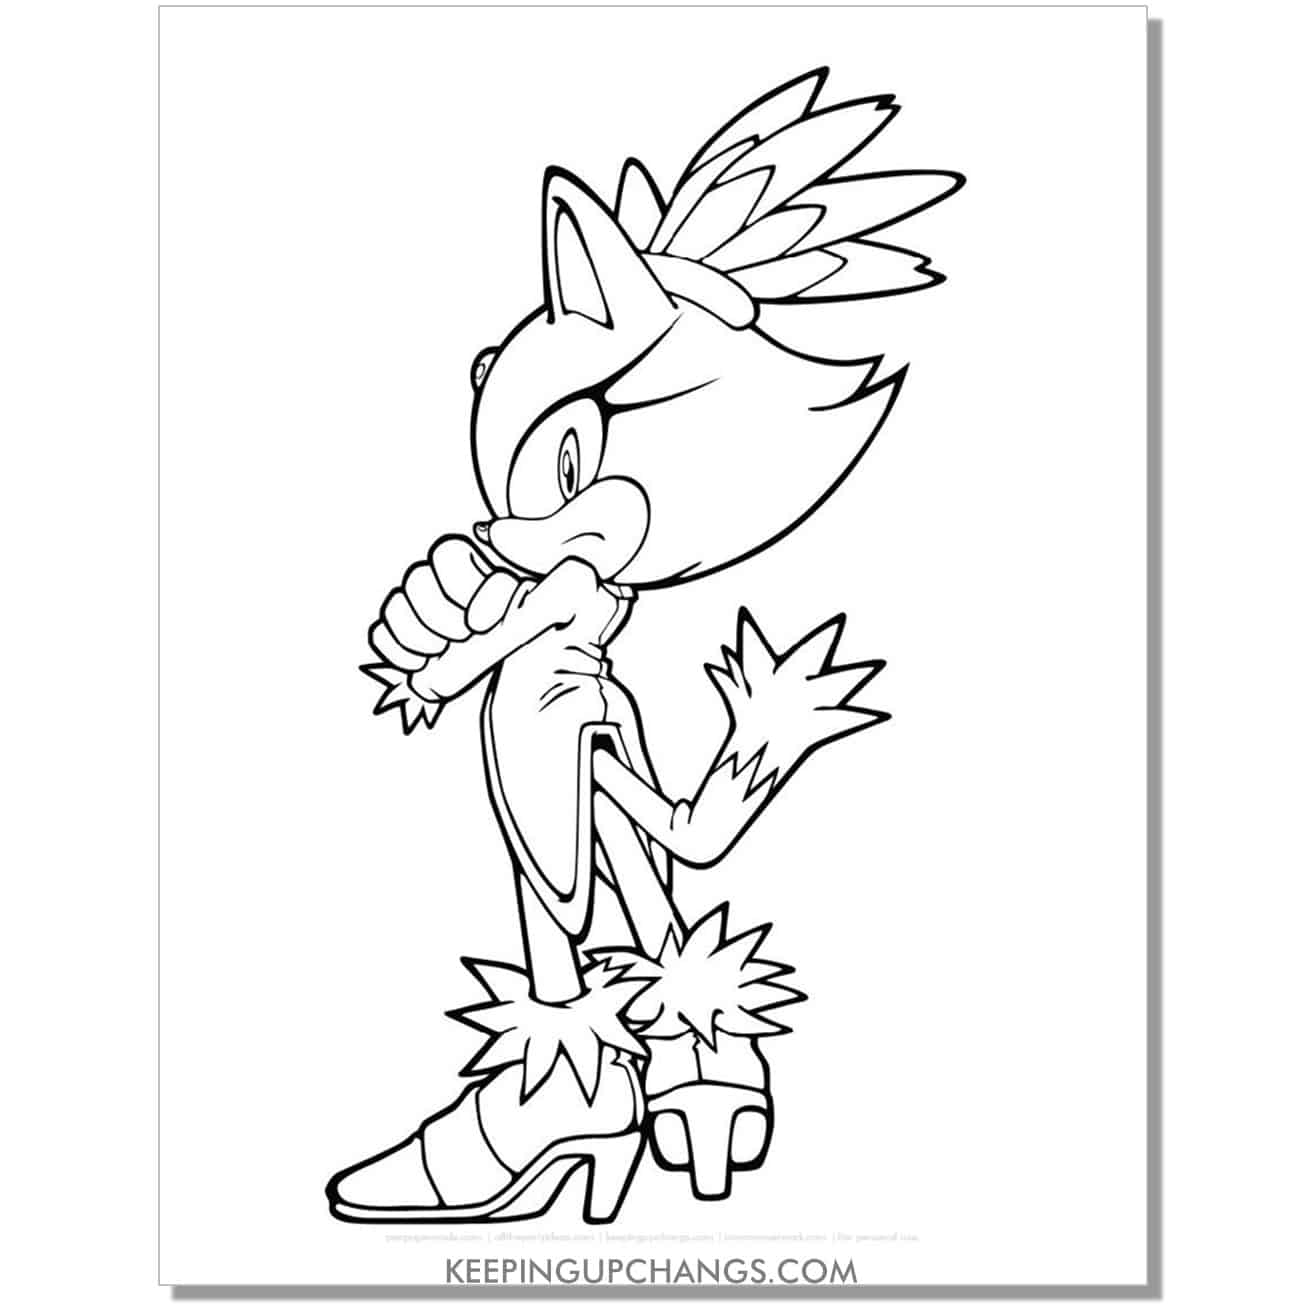 unhappy blaze cat sonic coloring page.